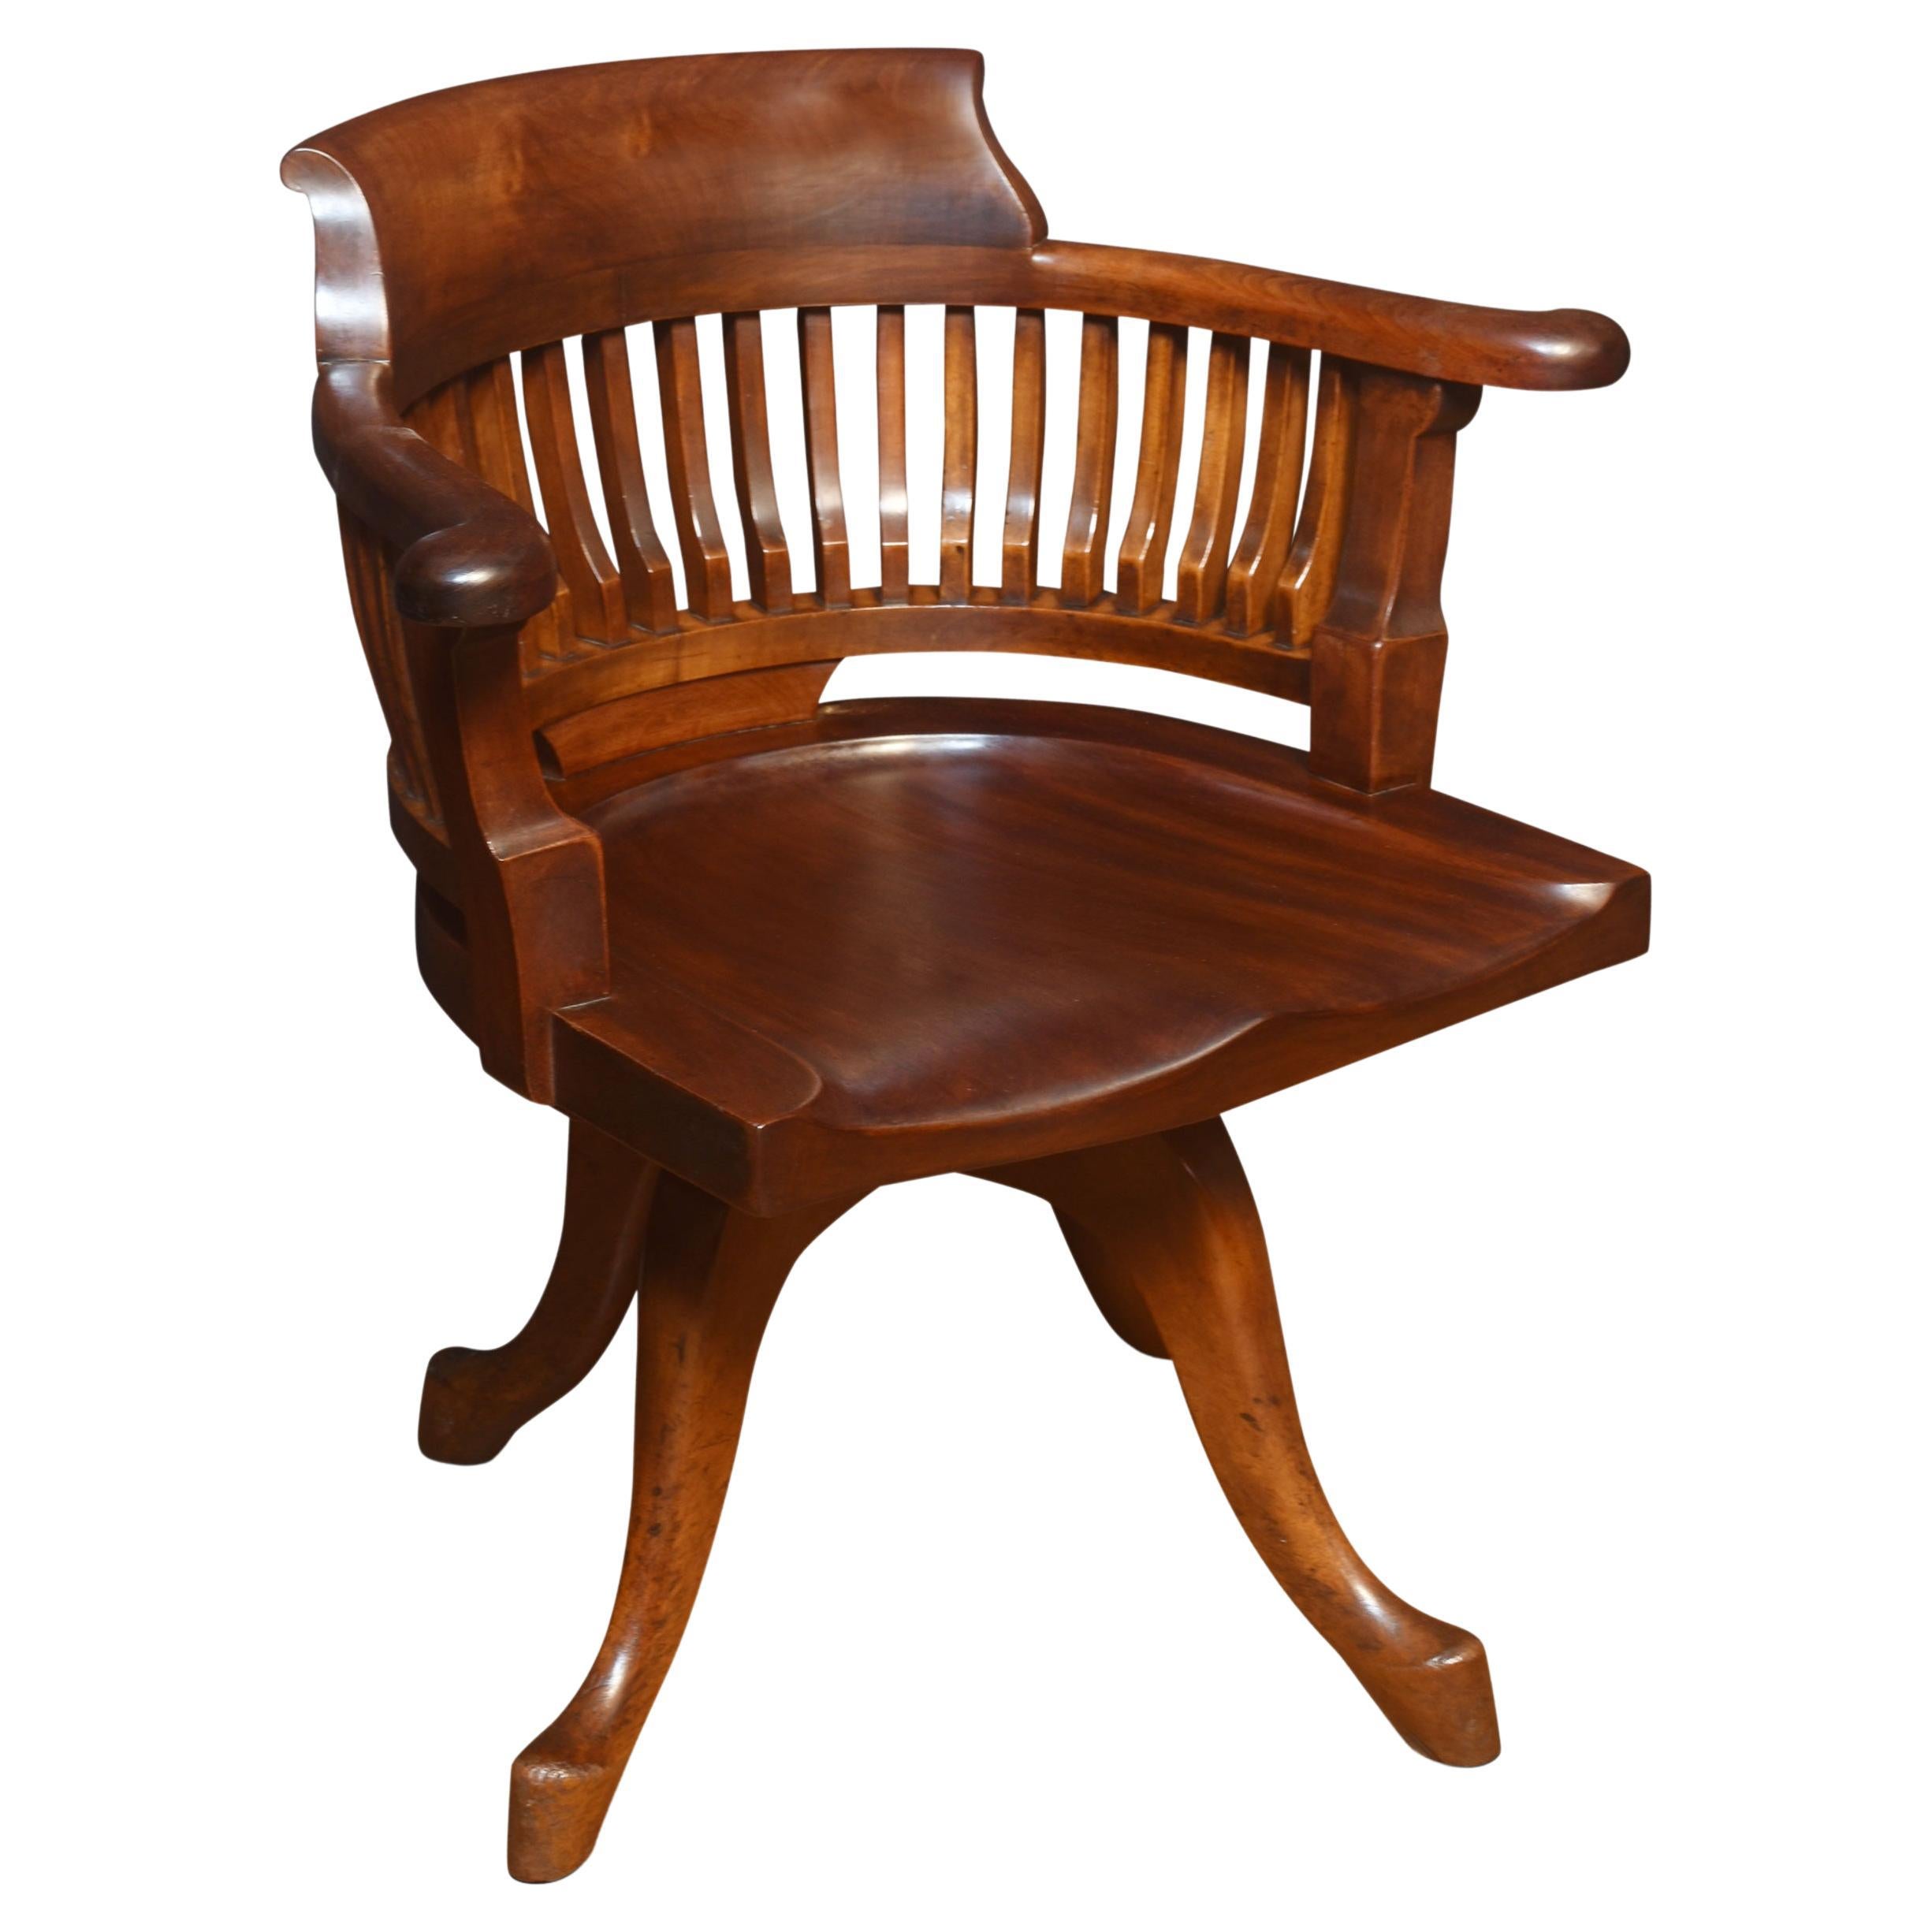 Early 20th Century Mahogany Office / Captain’s Revolving Desk Chair with Shaped For Sale